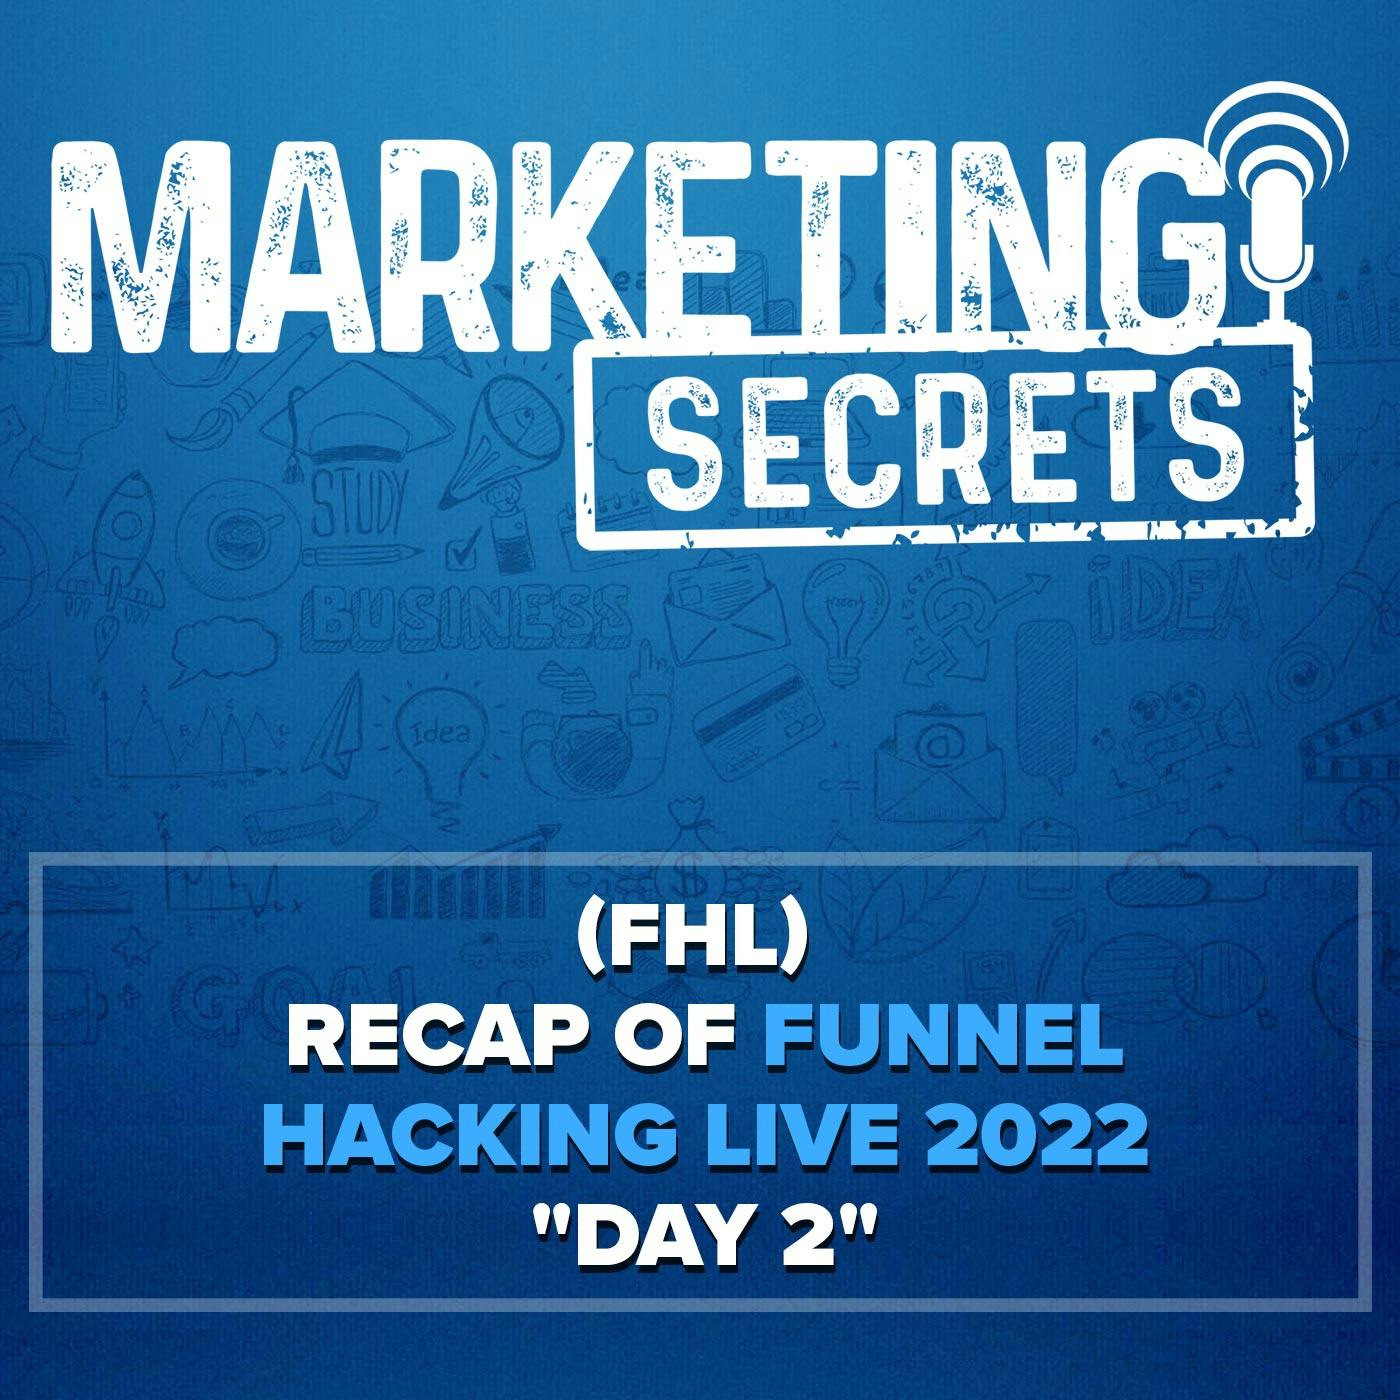 (FHL) Recap of Funnel Hacking Live 2022 "Day 2"